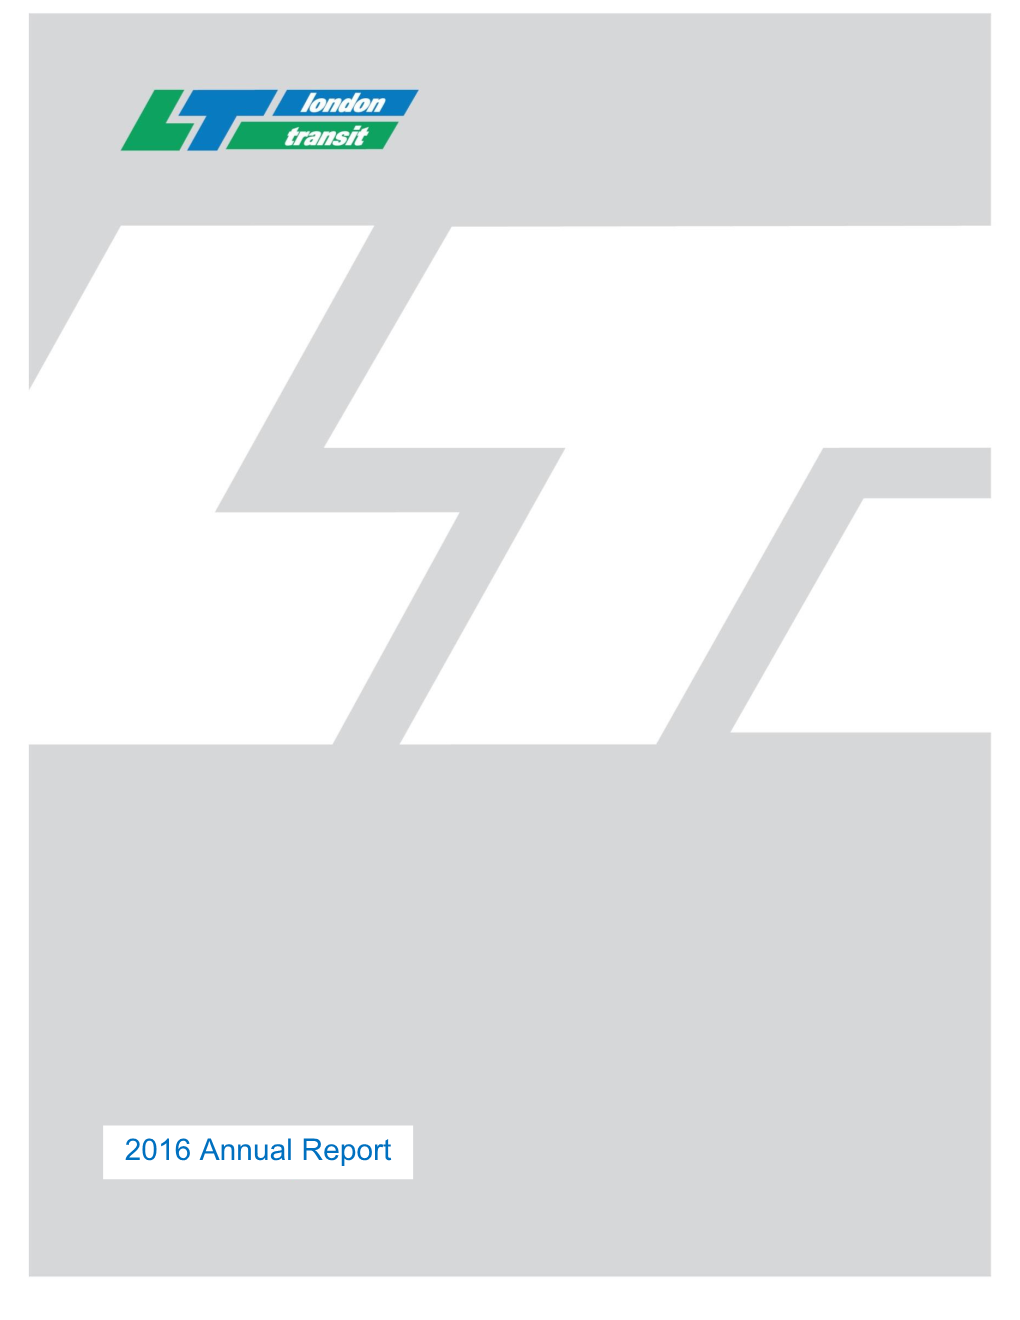 London Transit Commission 2016 Annual Report